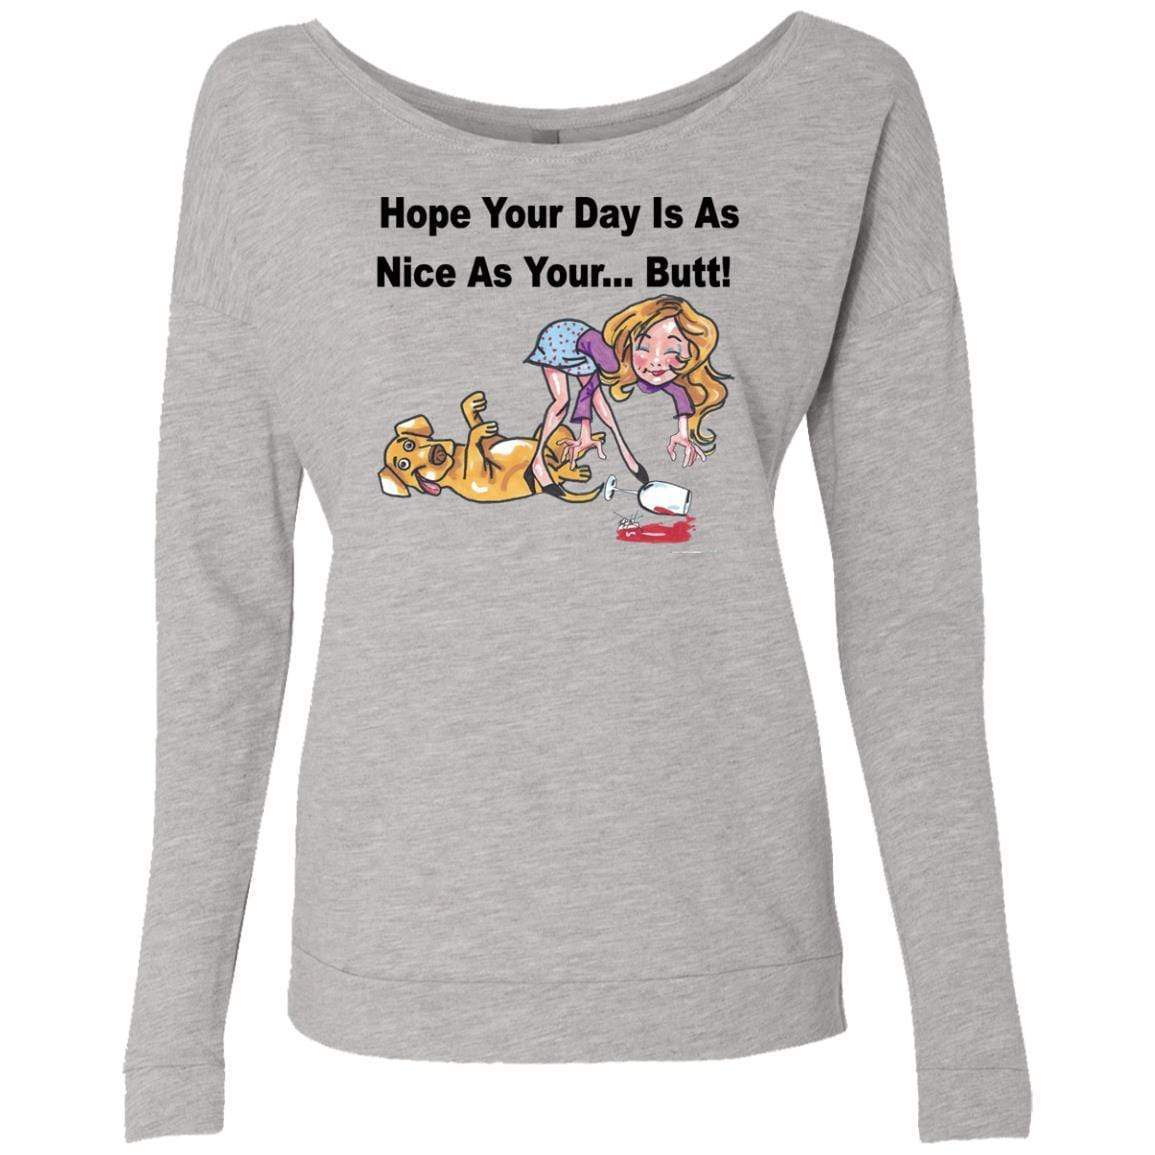 Sweatshirts Heather Grey / S WineyBitches.co "Hope Your Day Is As Nice As Your...Butt" Blk Lettering Ladies' French Terry Scoop WineyBitchesCo